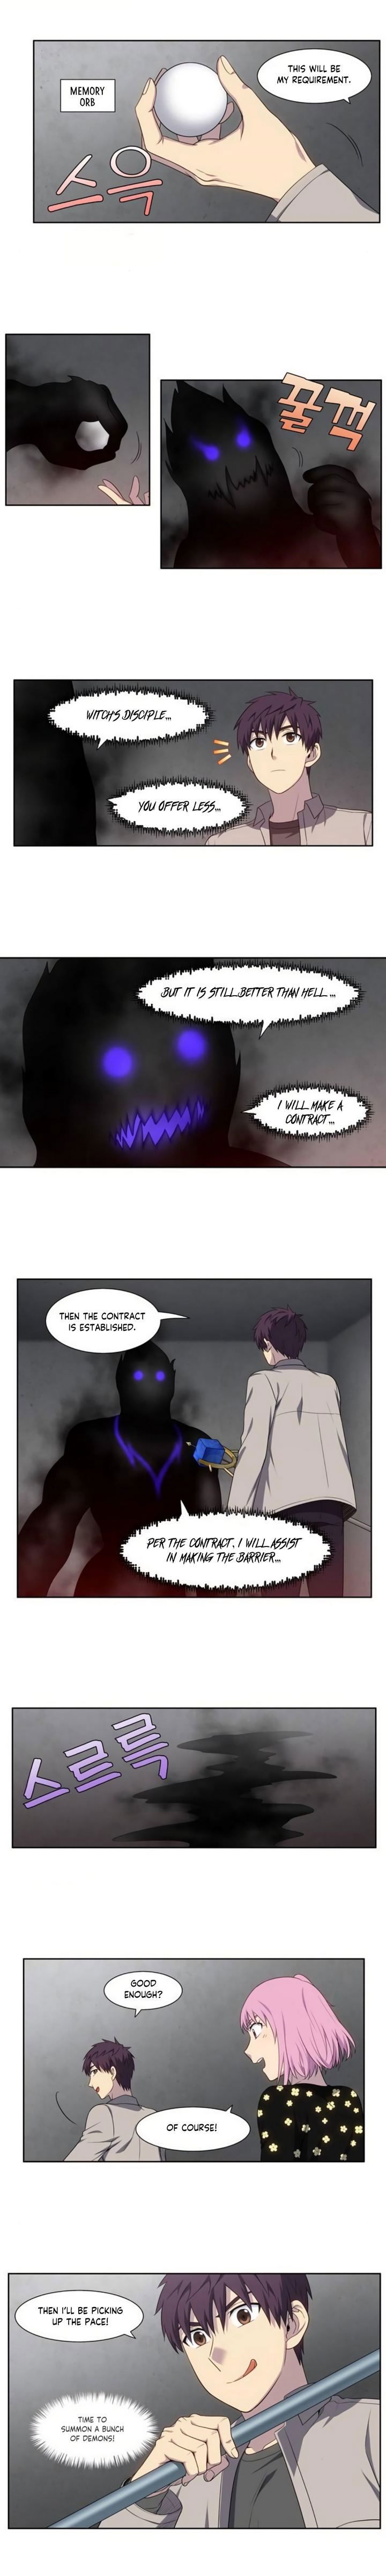 the-gamer-chap-358-4